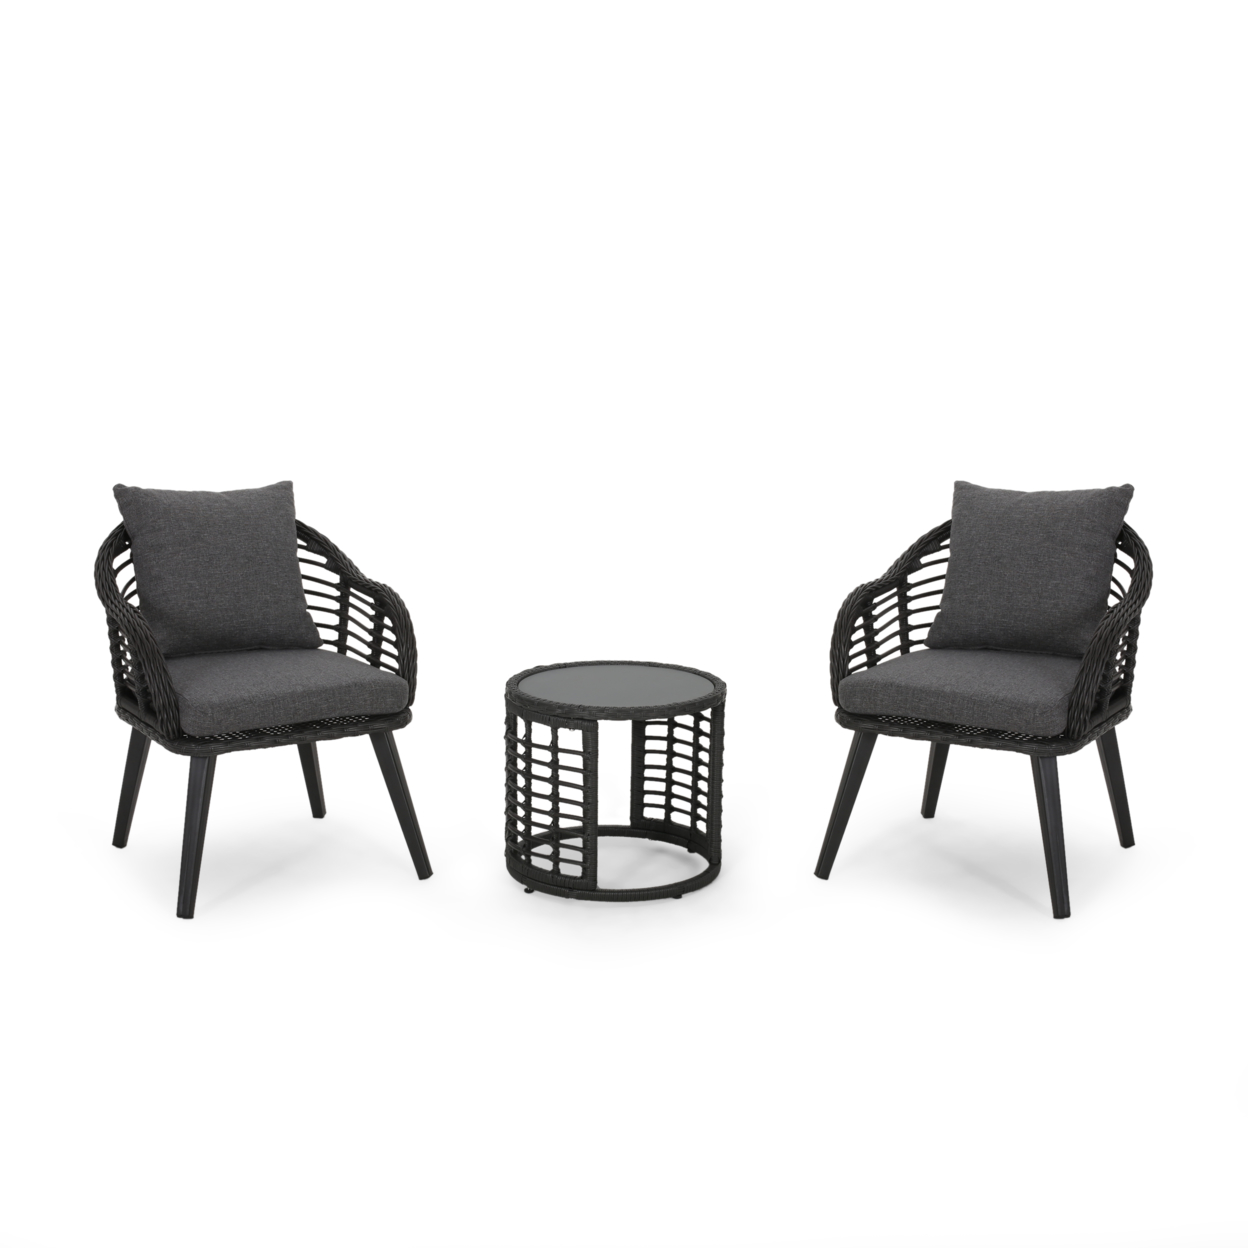 Cassie Outdoor Modern Boho 2 Seater Wicker Chat Set With Side Table - Gray + Black